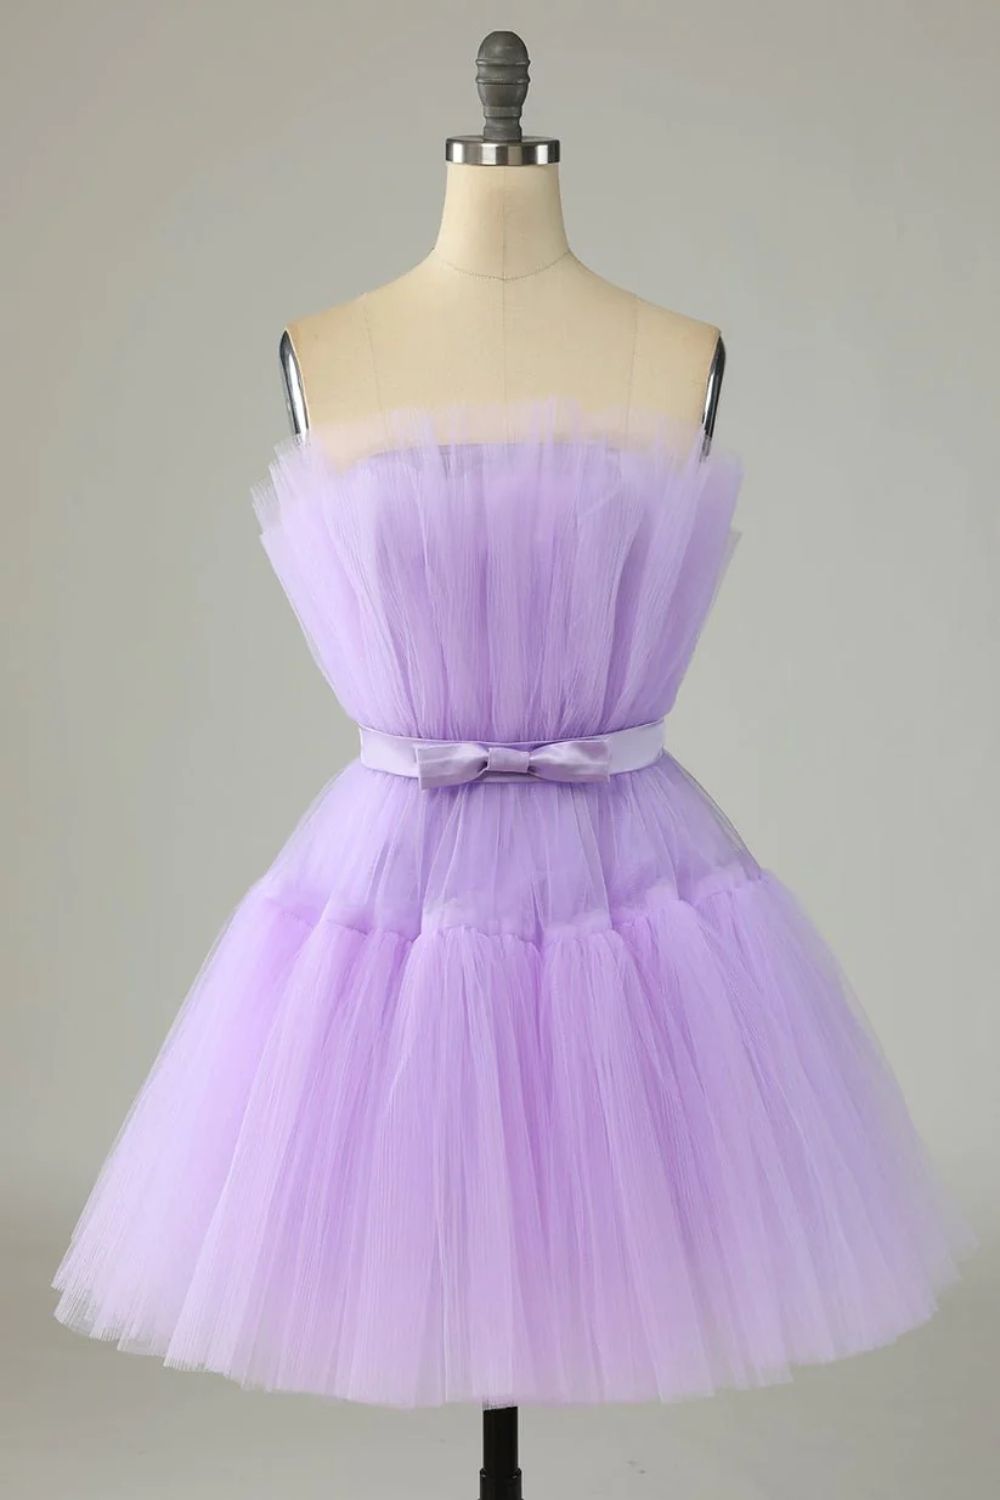 A Line Pink Tulle Above-Knee Homecoming Cocktail Dress With Bowknot